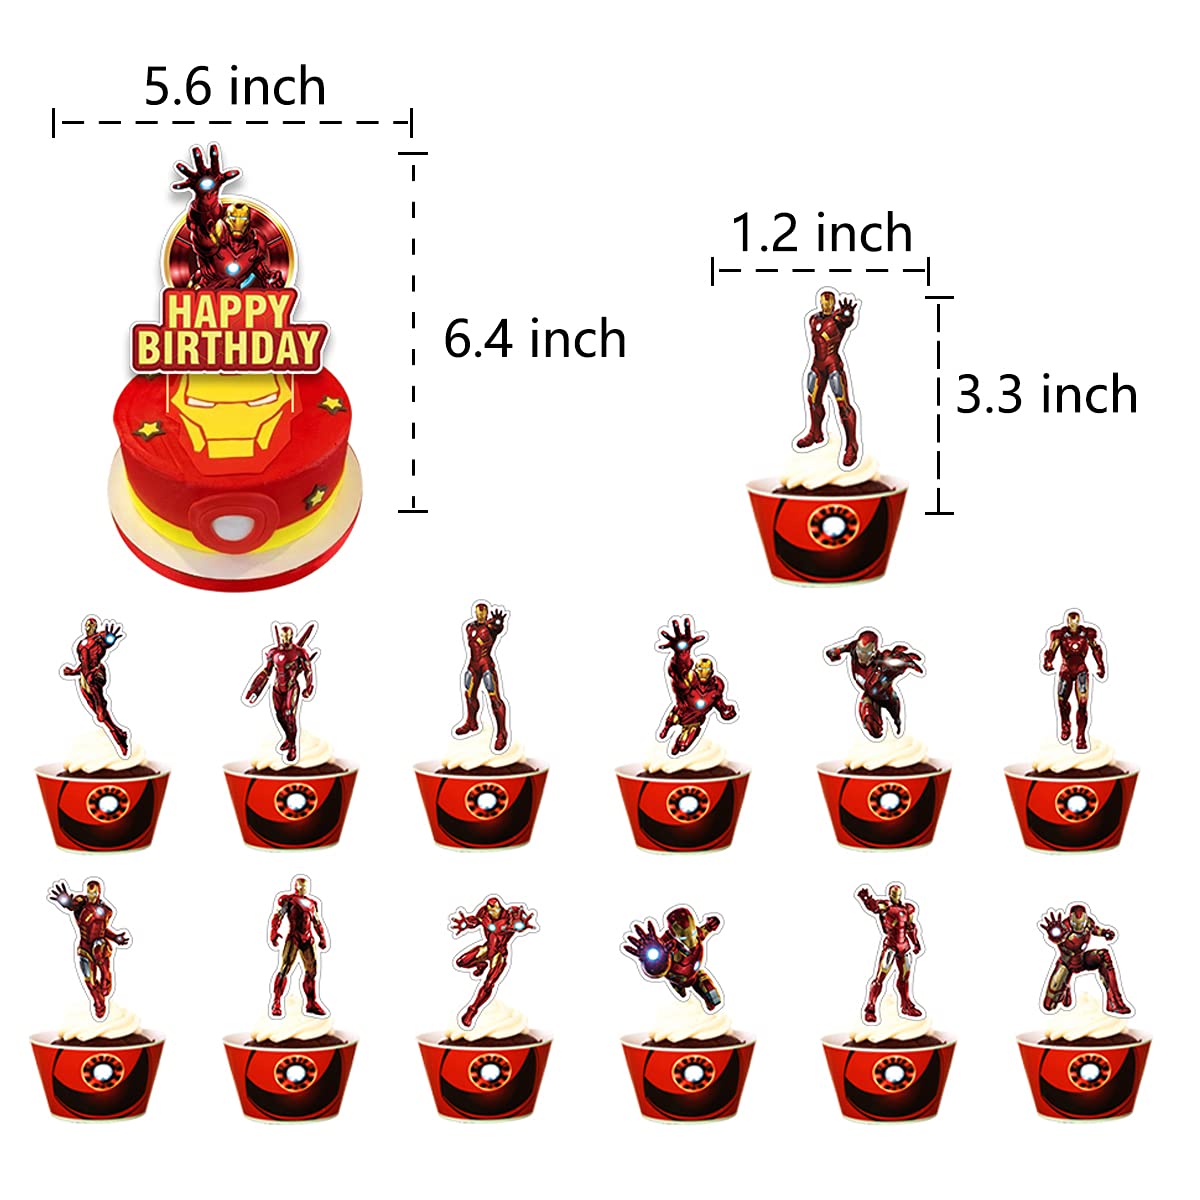 86 Pcs Birthday Party Decorations, Birthday Party Supplies For Iron Man Includes The Iron Man Inspired Happy Birthday Banner - Cake Topper - 12 Cupcake Toppers - 20 Balloons - 52 Sticker